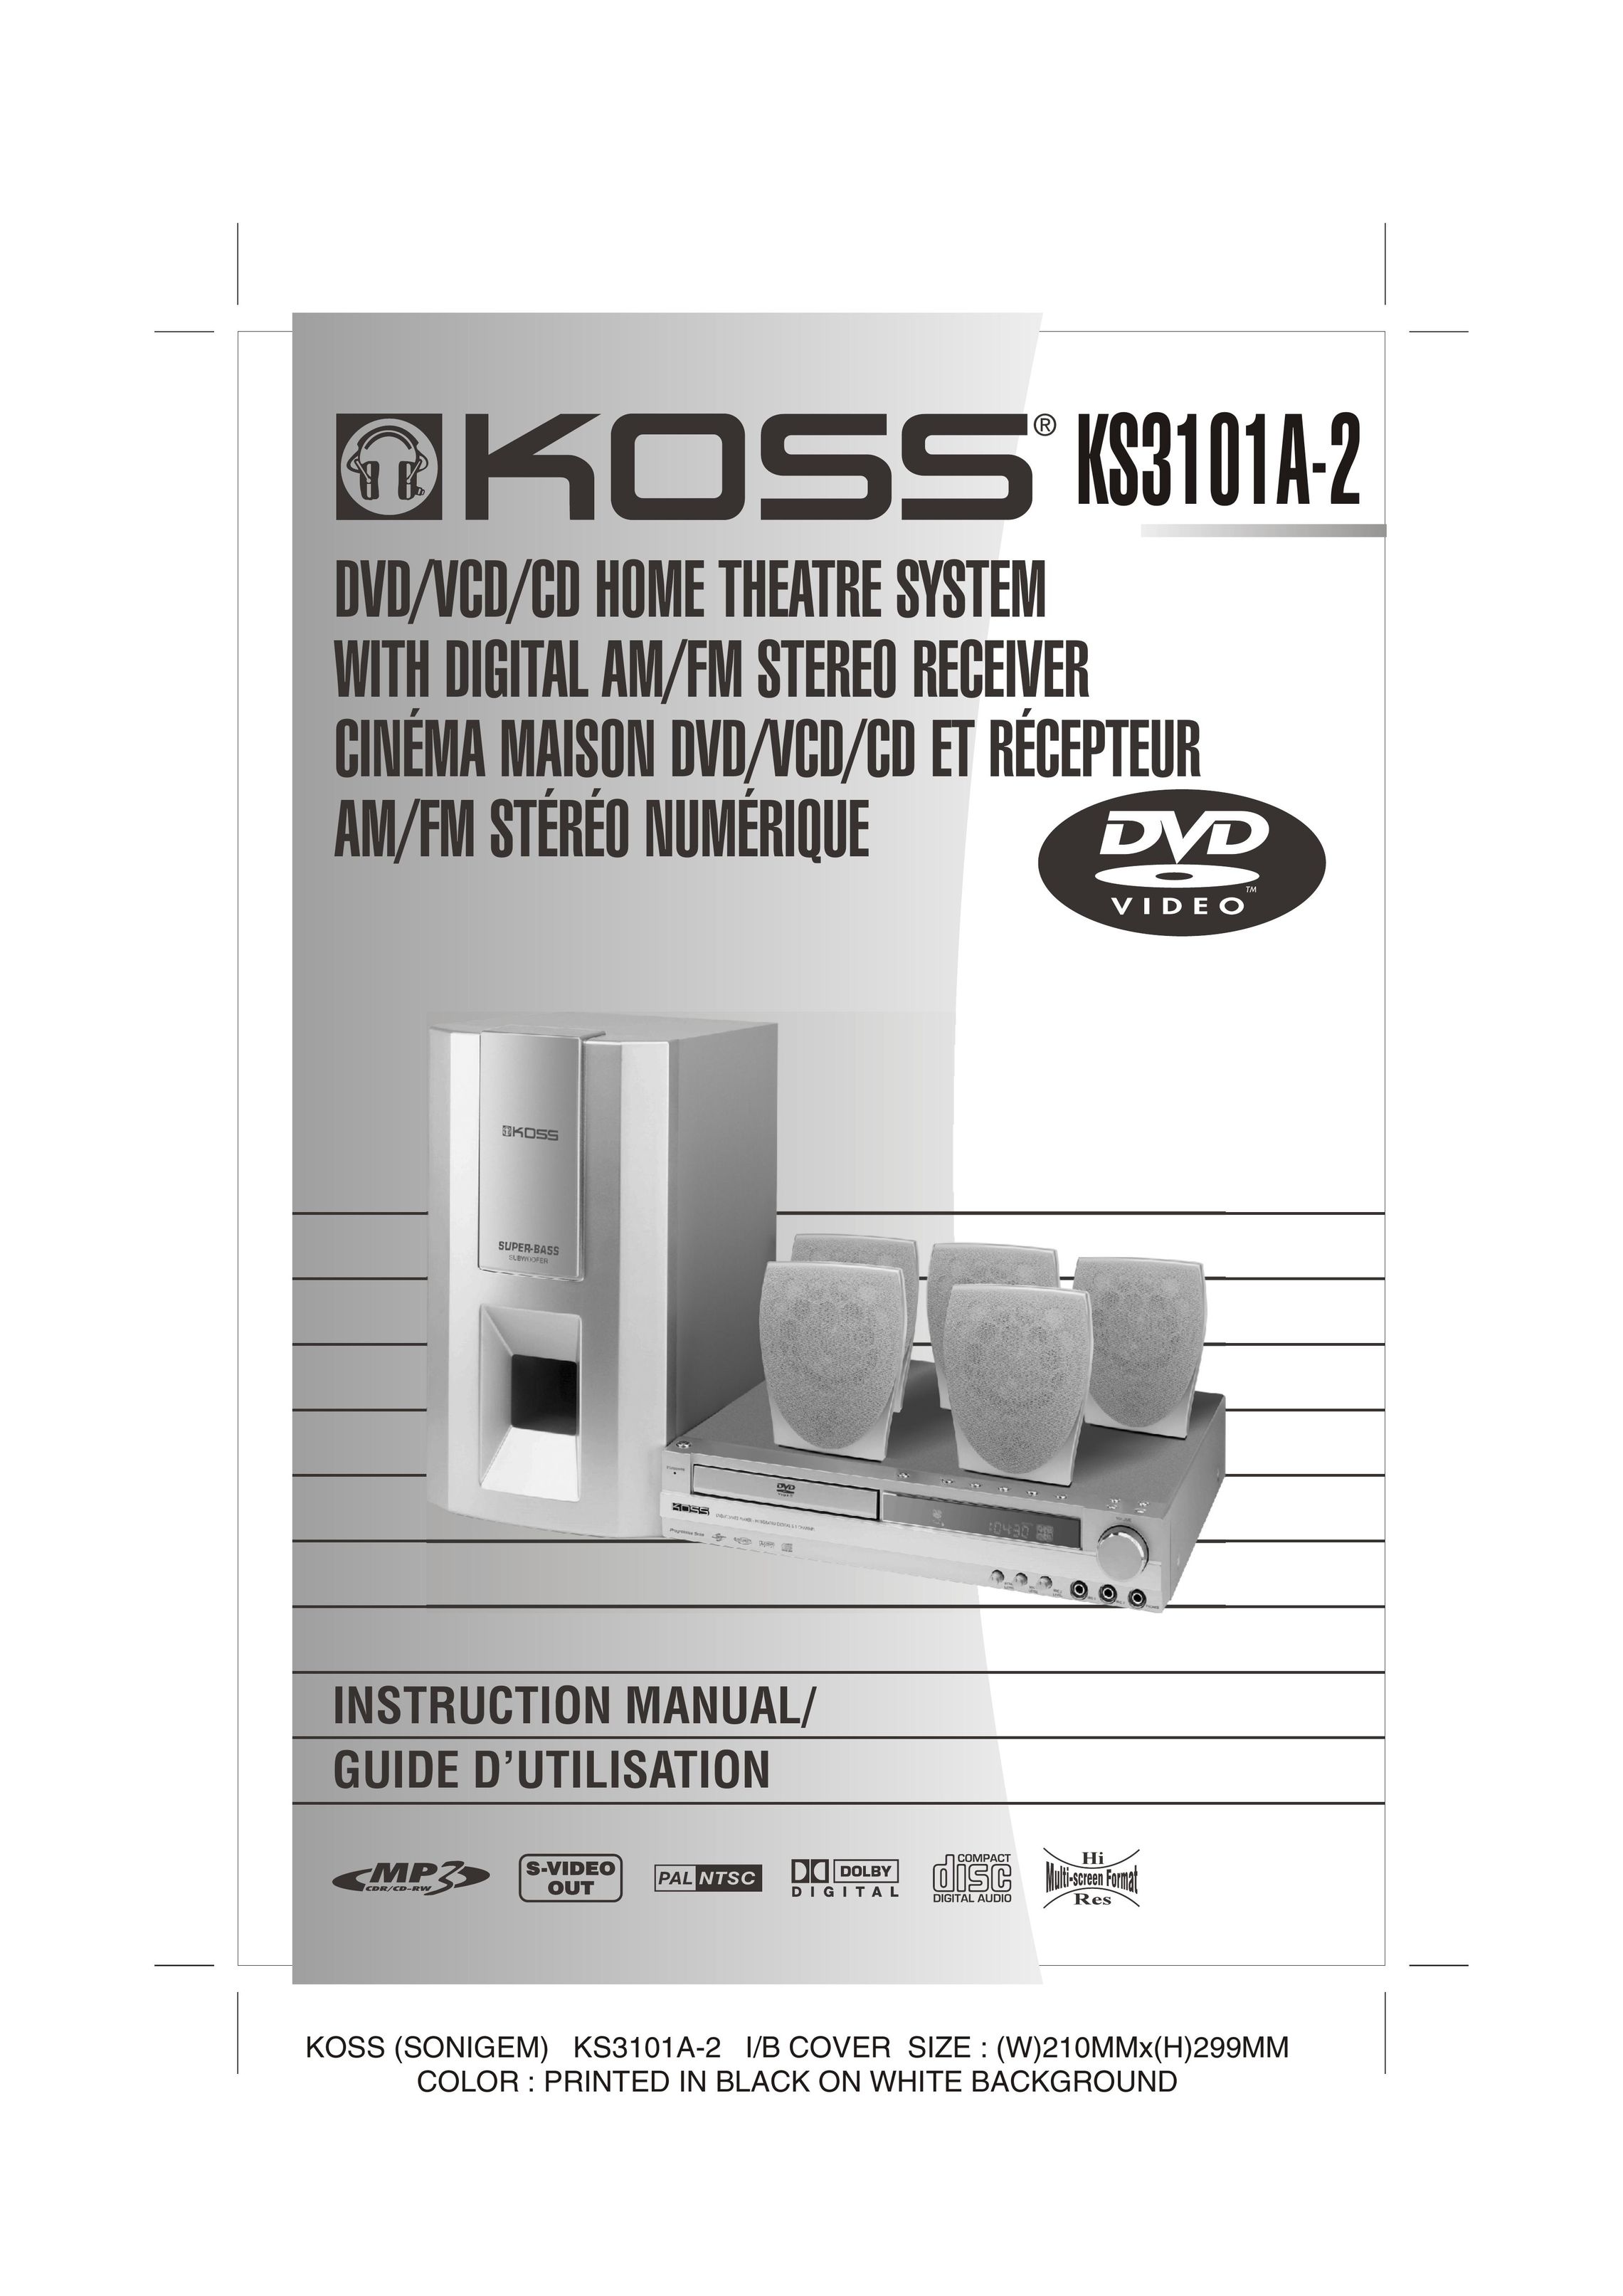 Koss KS3101A-2 Home Theater System User Manual